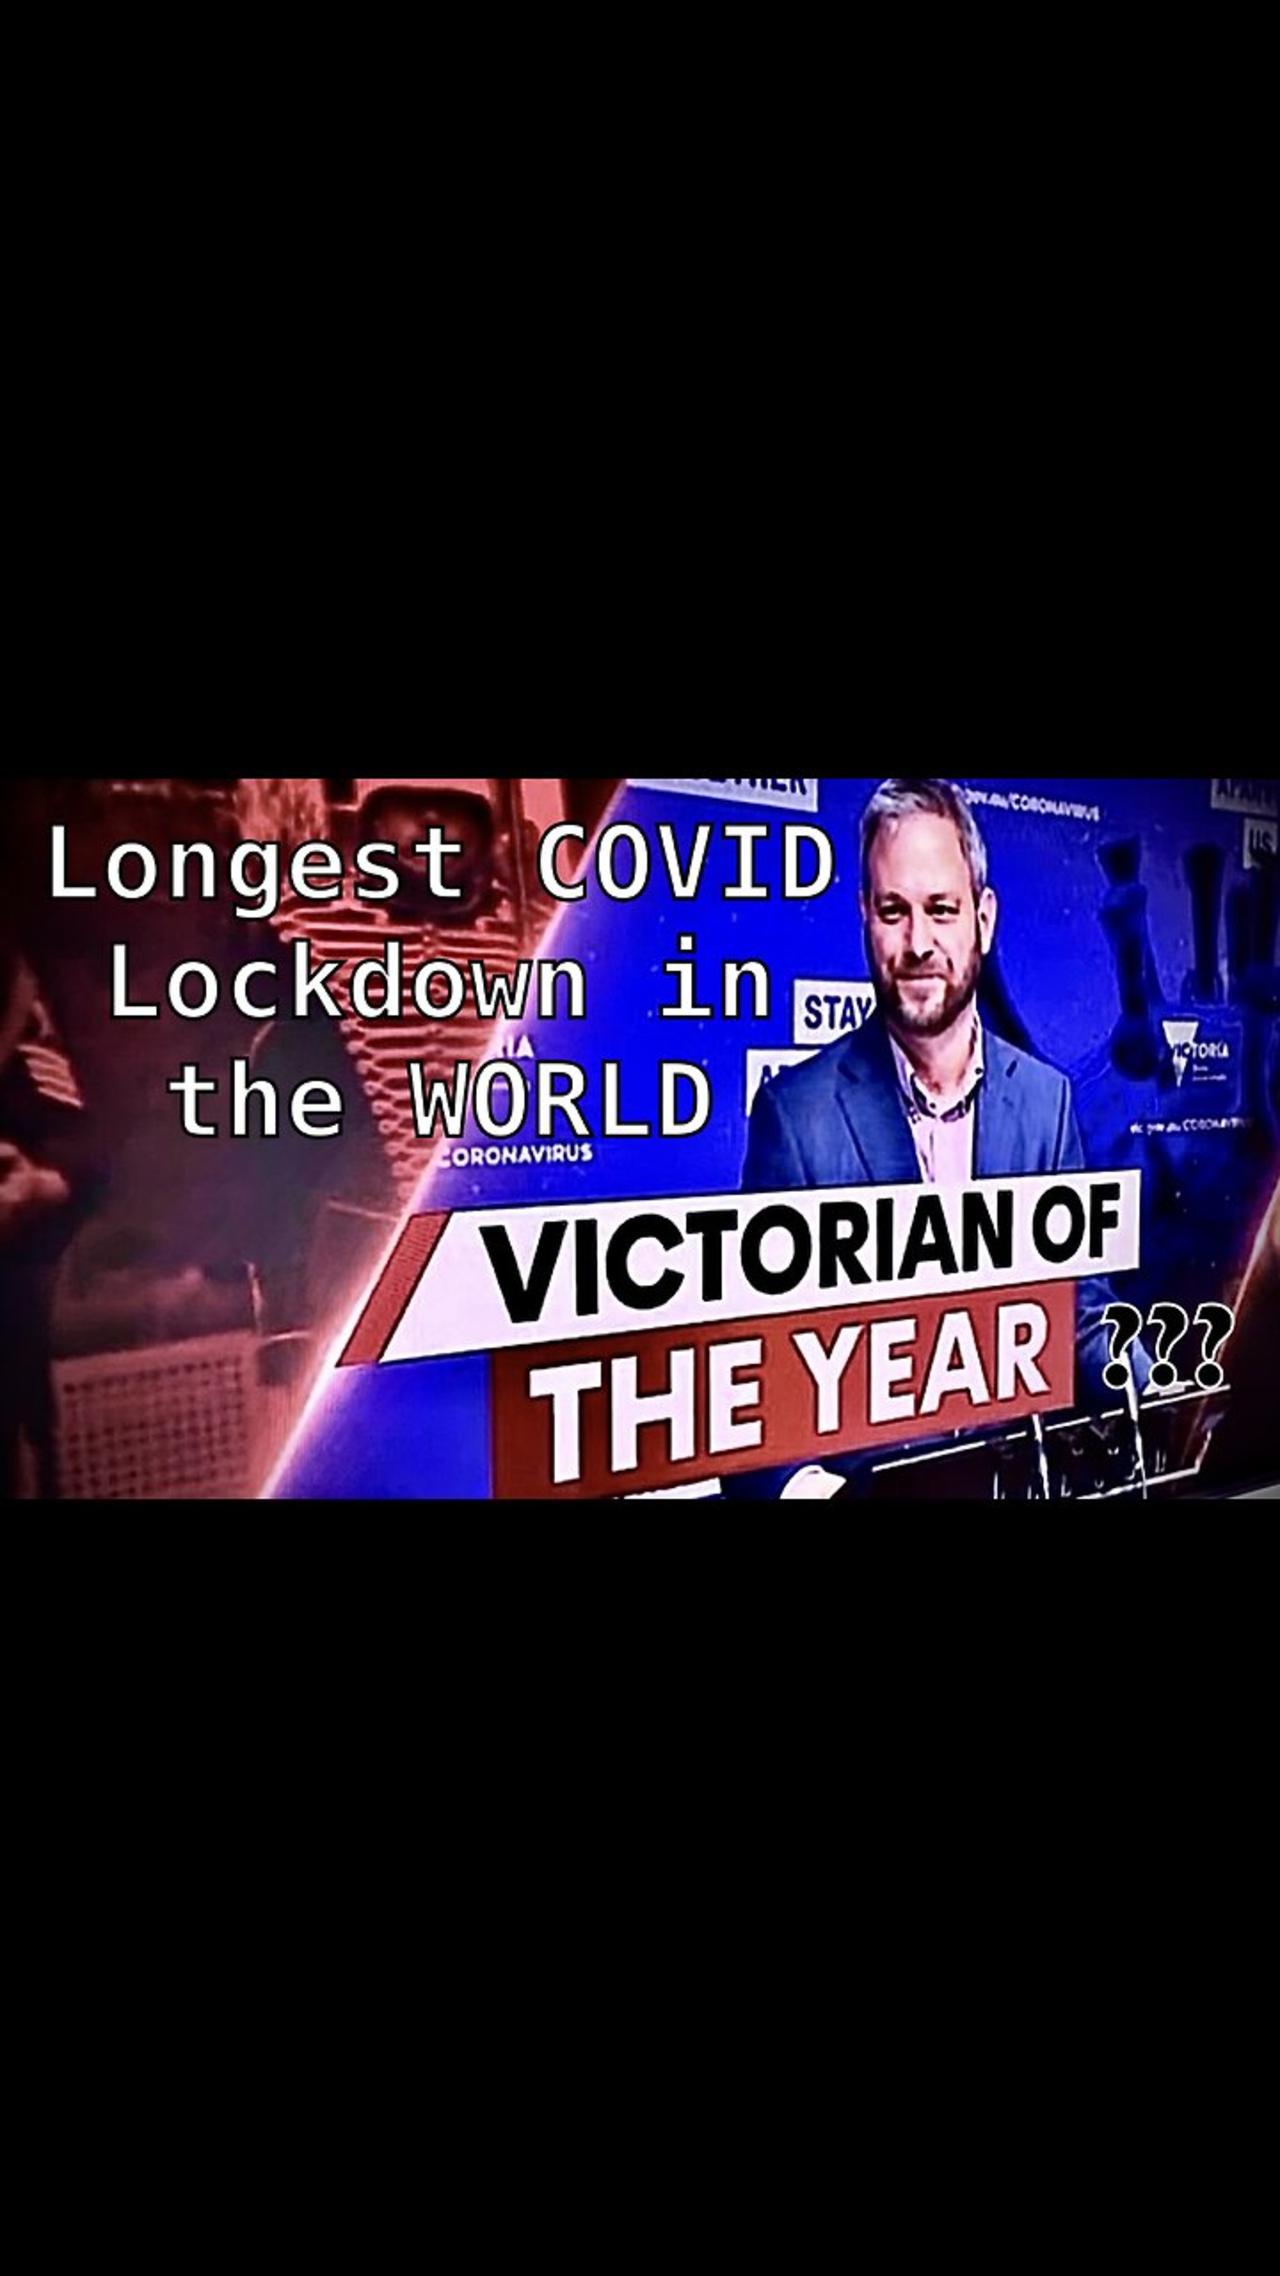 Man Behind World’s Longest Lockdown is Victorian of the Year???